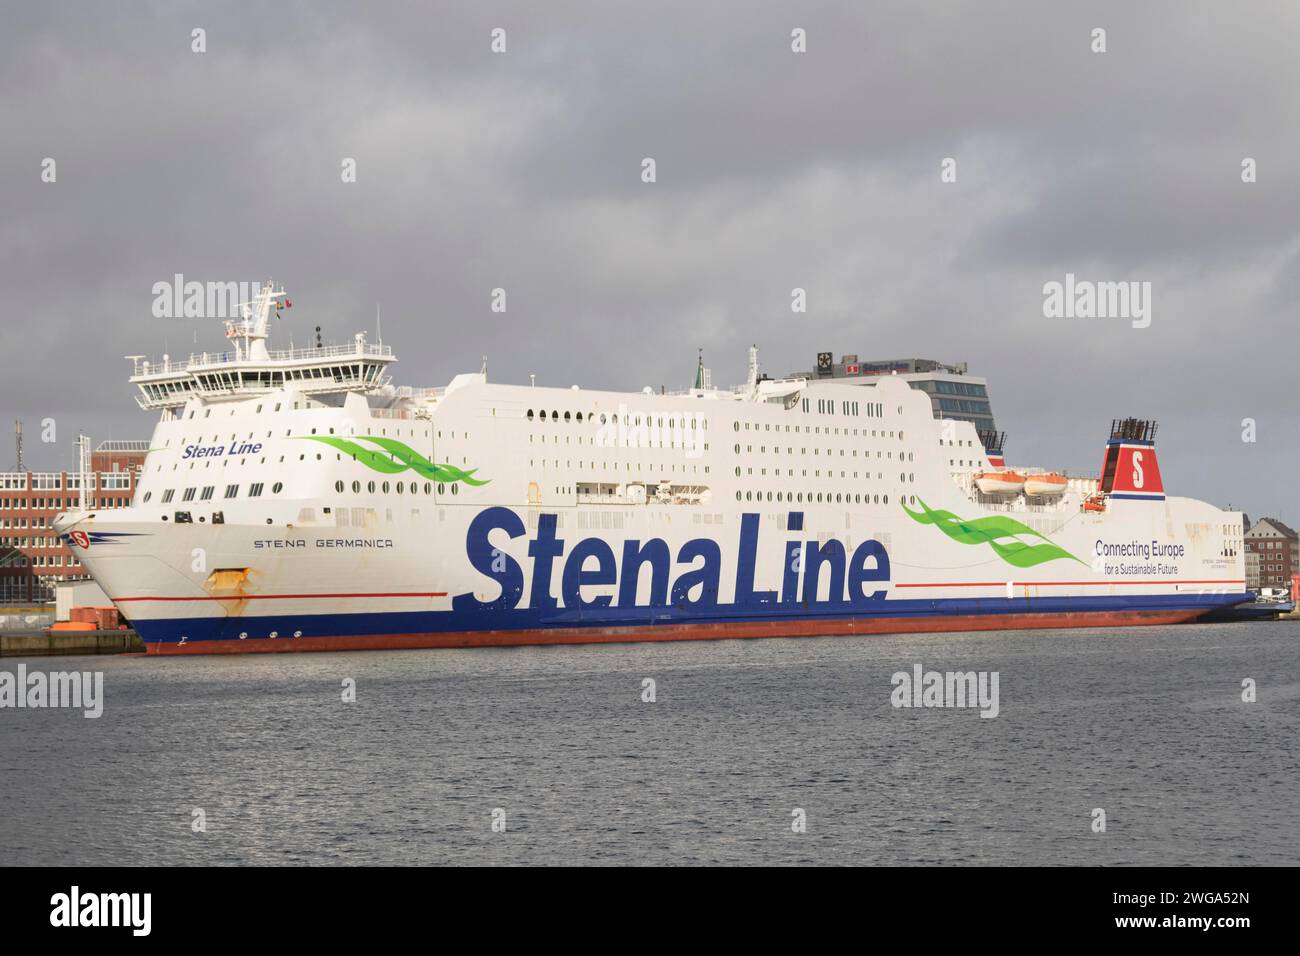 Ferry Stena Germanica of the Swedish shipping company Stena Line in the harbour at the Kiel Fjord, Baltic Sea, Kiel, Schleswig-Holstein, Germany Stock Photo